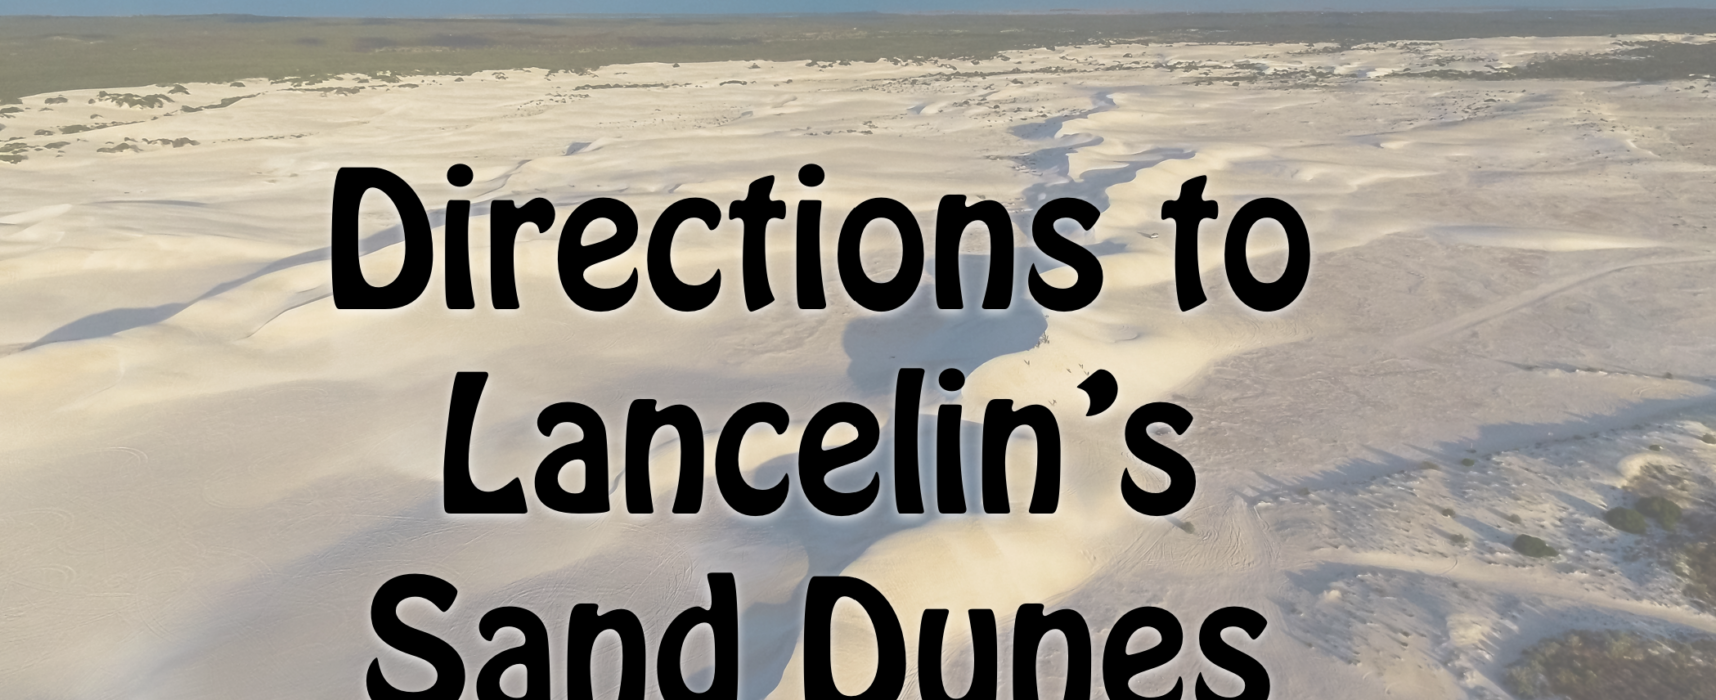 VIDEO DIRECTIONS TO THE DUNES